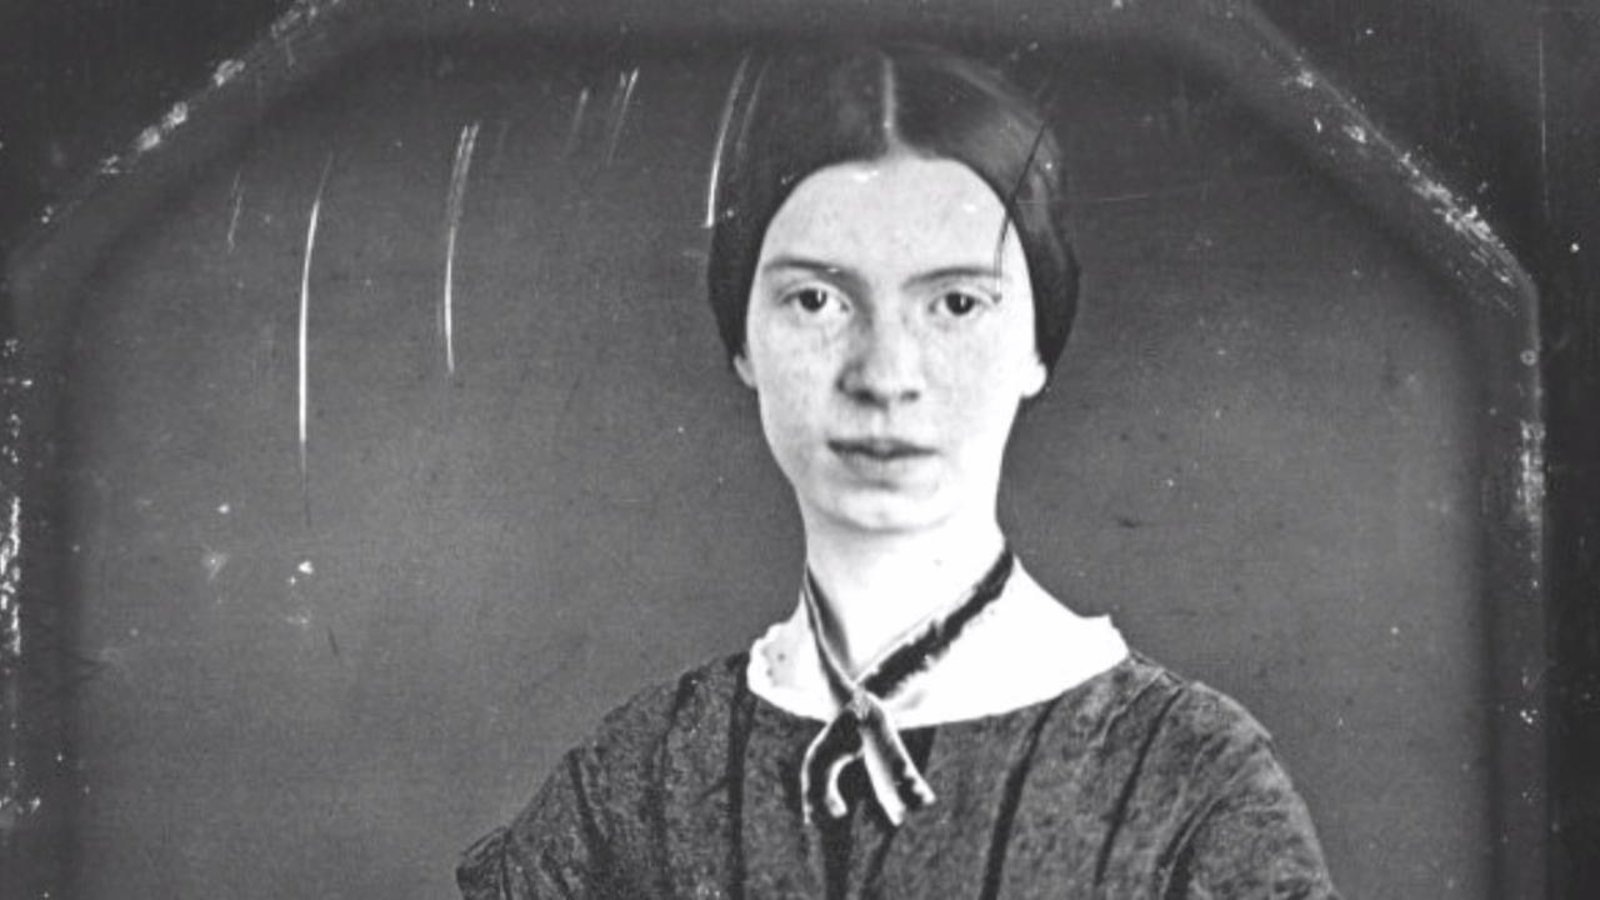 Dickinson - The Life and Work of Emily Dickinson